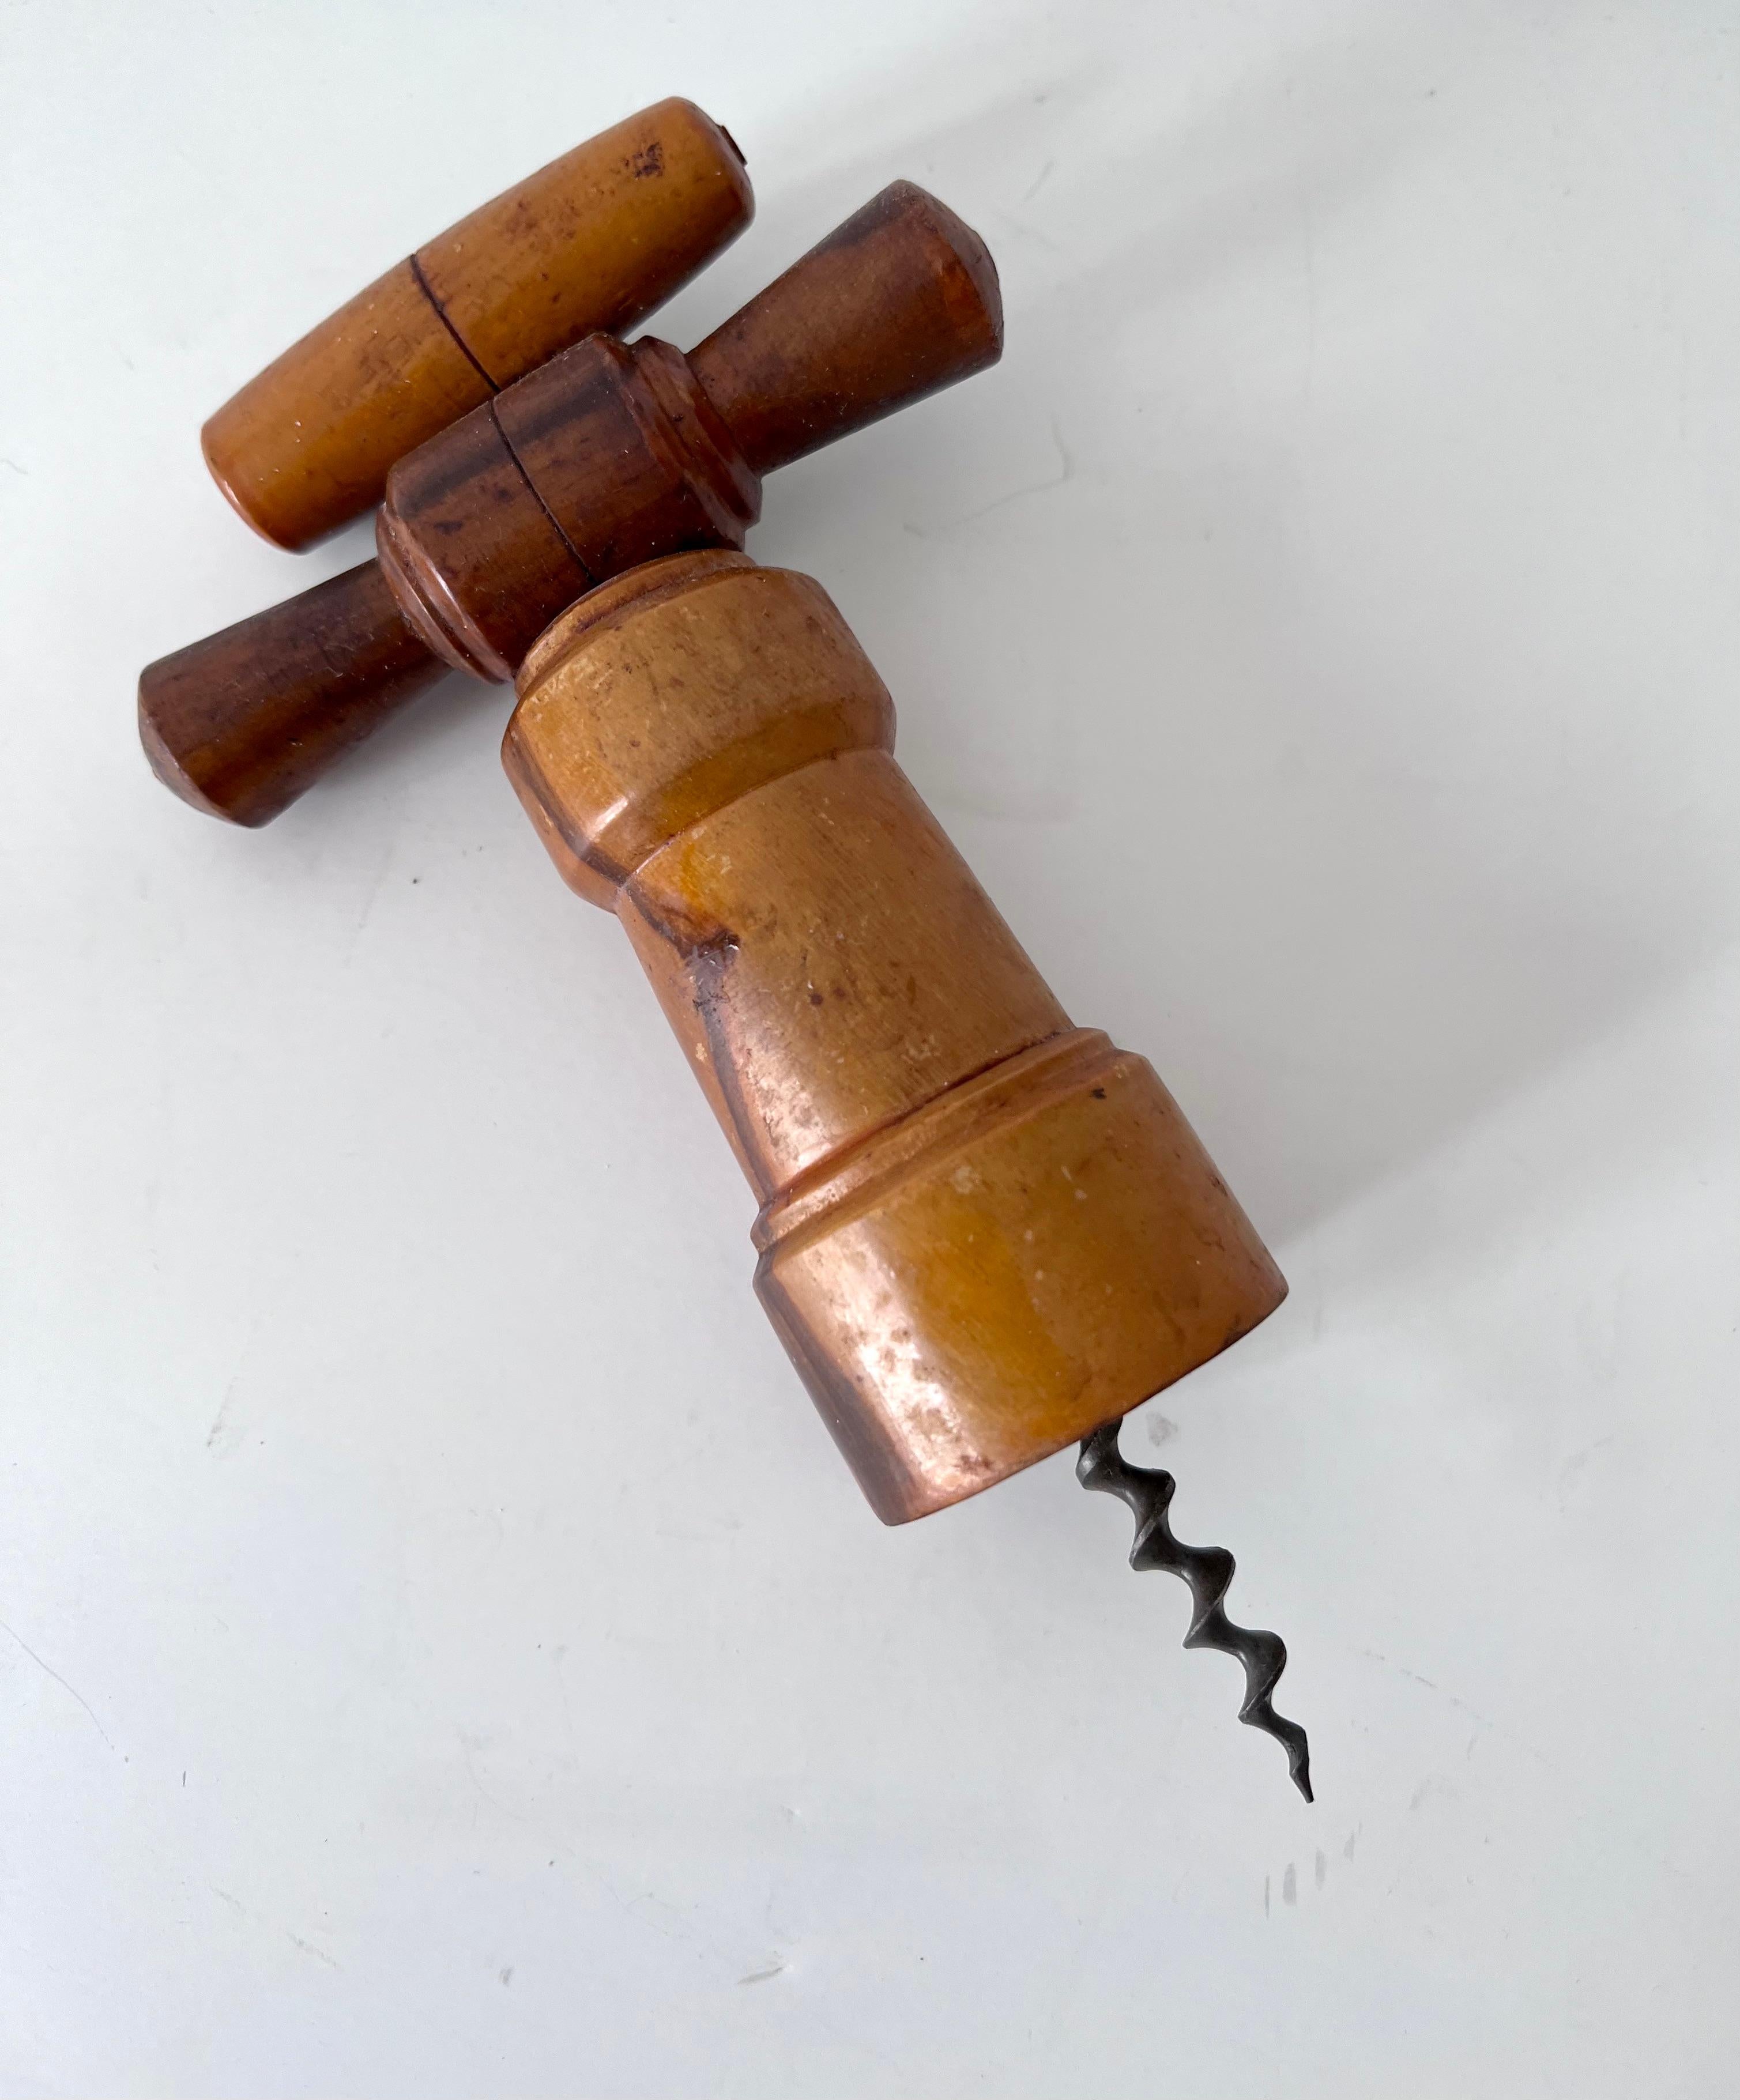 A wonderful vintage cork screw of wood - a compliment to those bars with a bit of old world character. Also makes a nice decorative piece if not functioning.